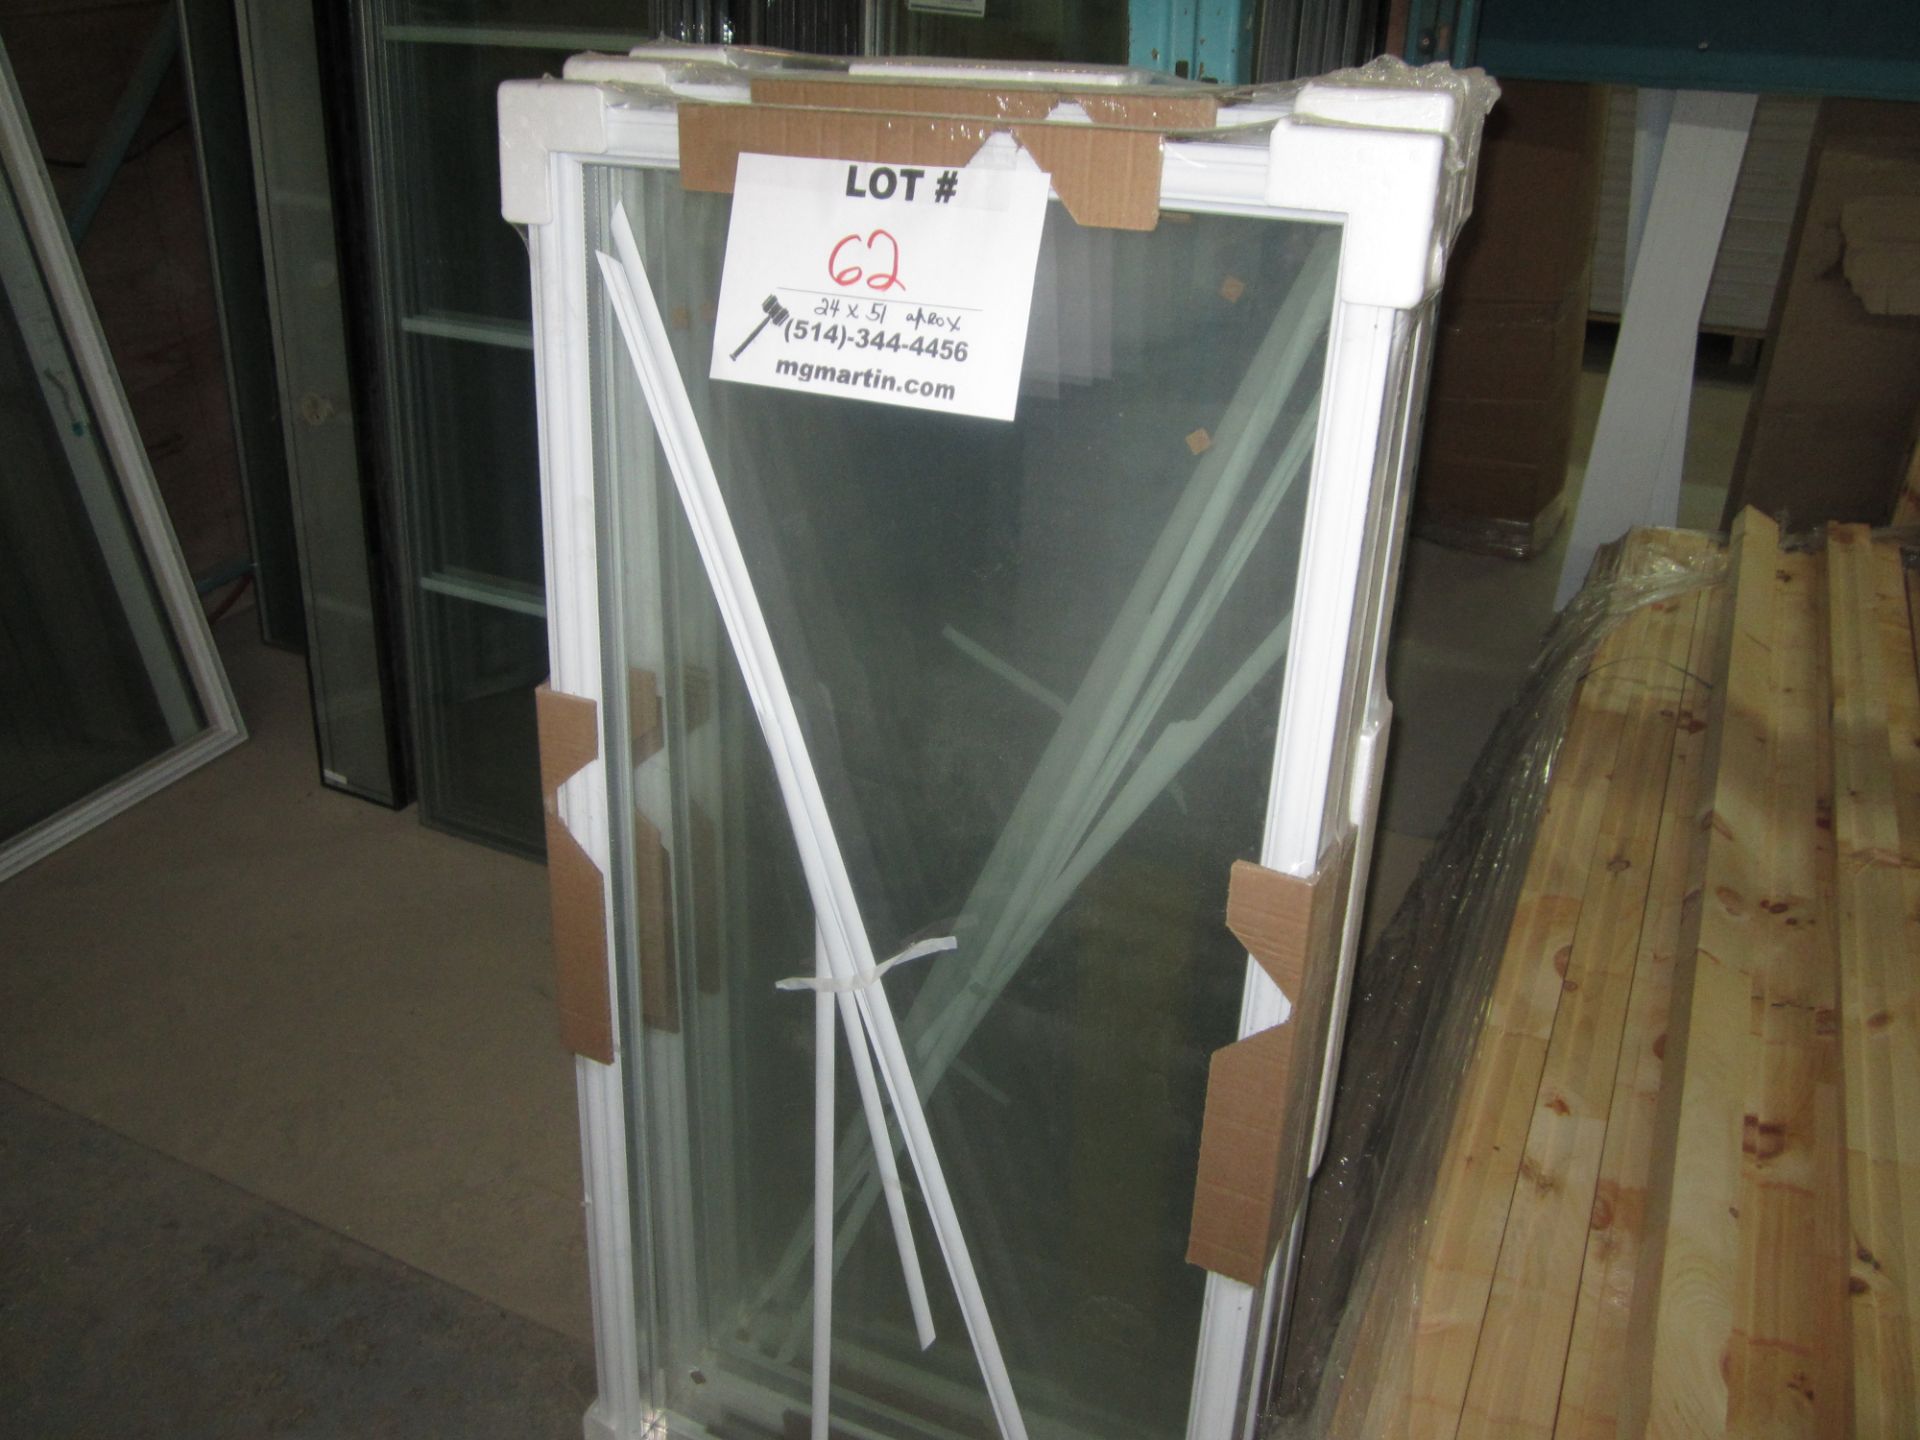 New glass door inserts approx. 24'' x 51''